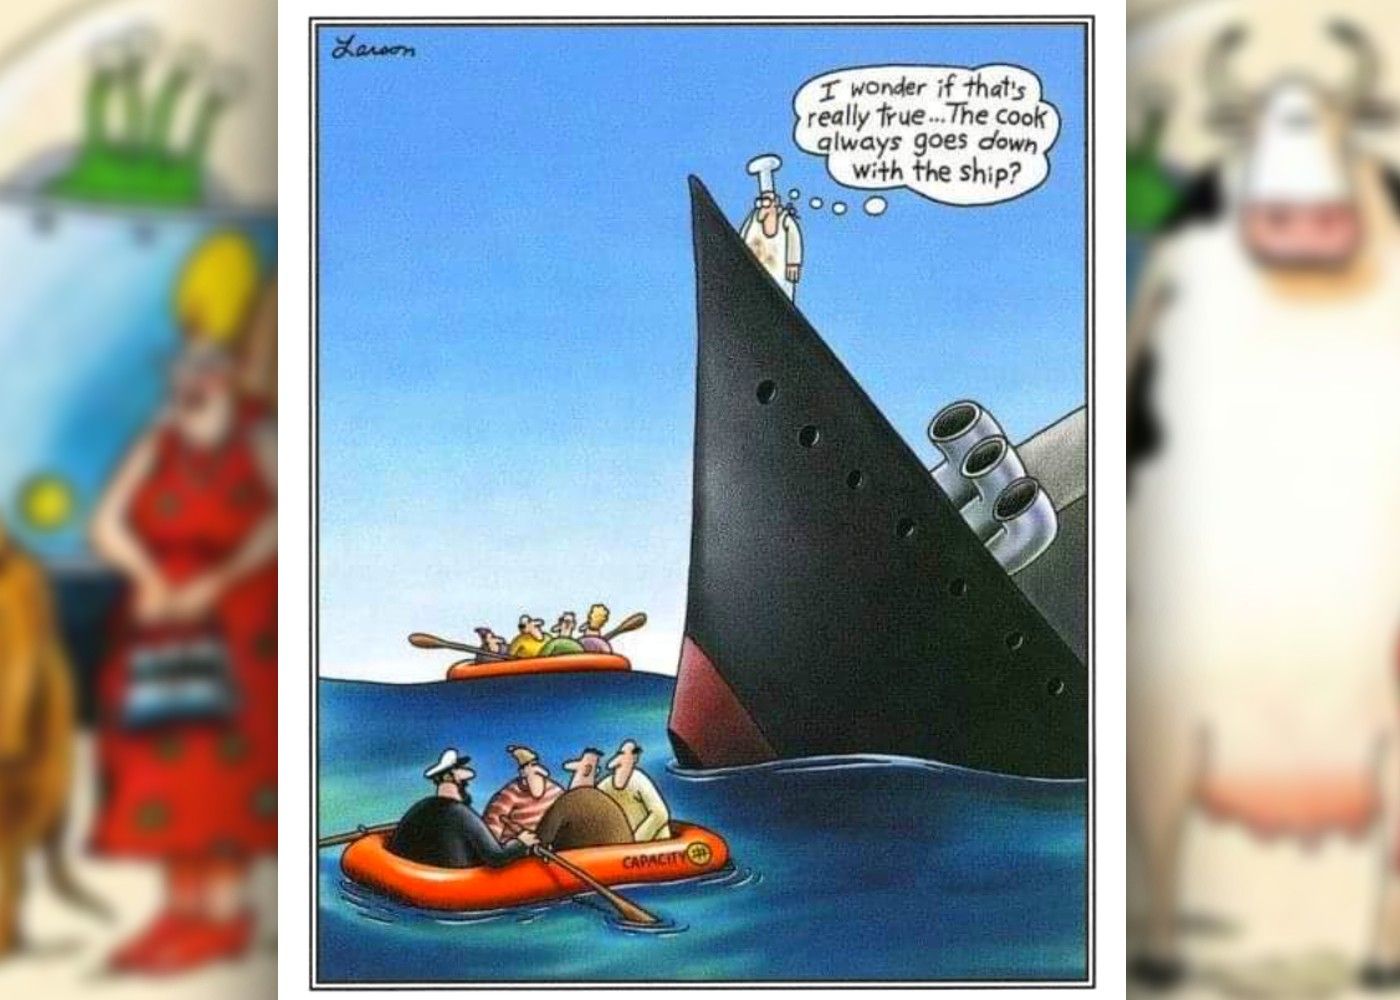 the far side comic where the comic goes down with the ship instead of the captain